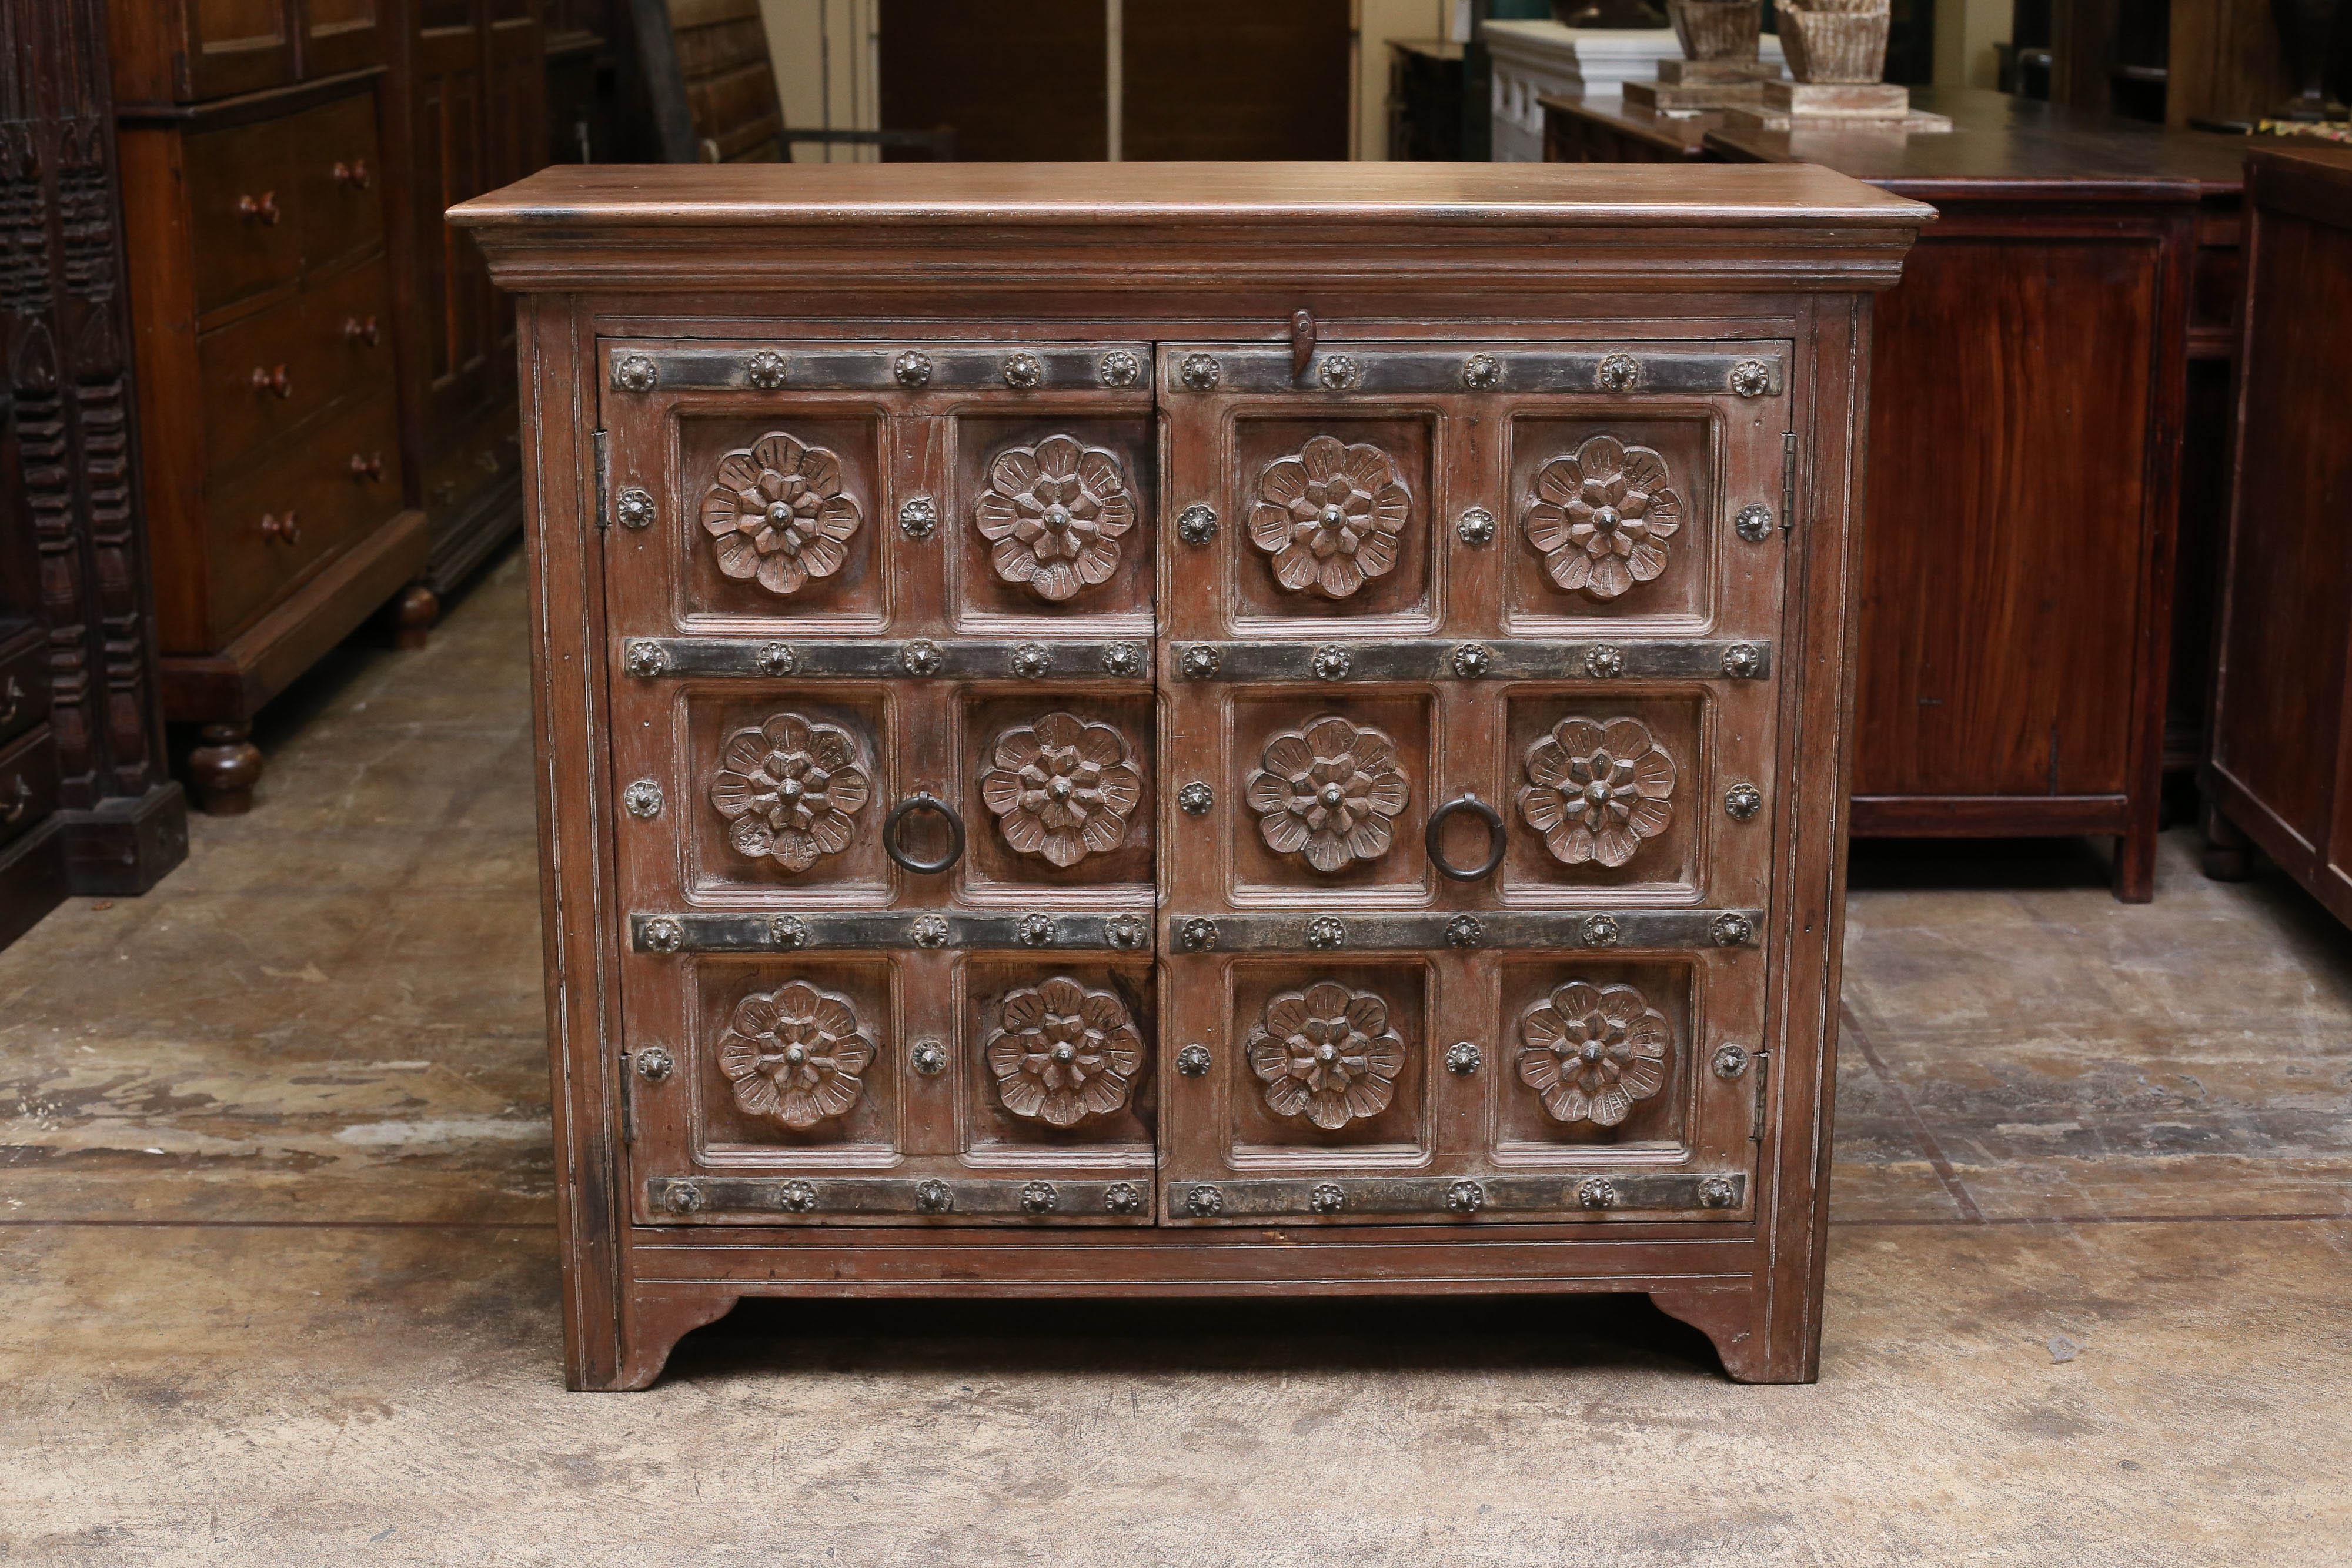 This rustic sturdily made vanity comes from an old Dutch colonial farm located in the plains of the holy river Ganges.
It is made of all teak wood and heavily reinforced with hand-forged iron bars and iron studs and decorated with hand-carved